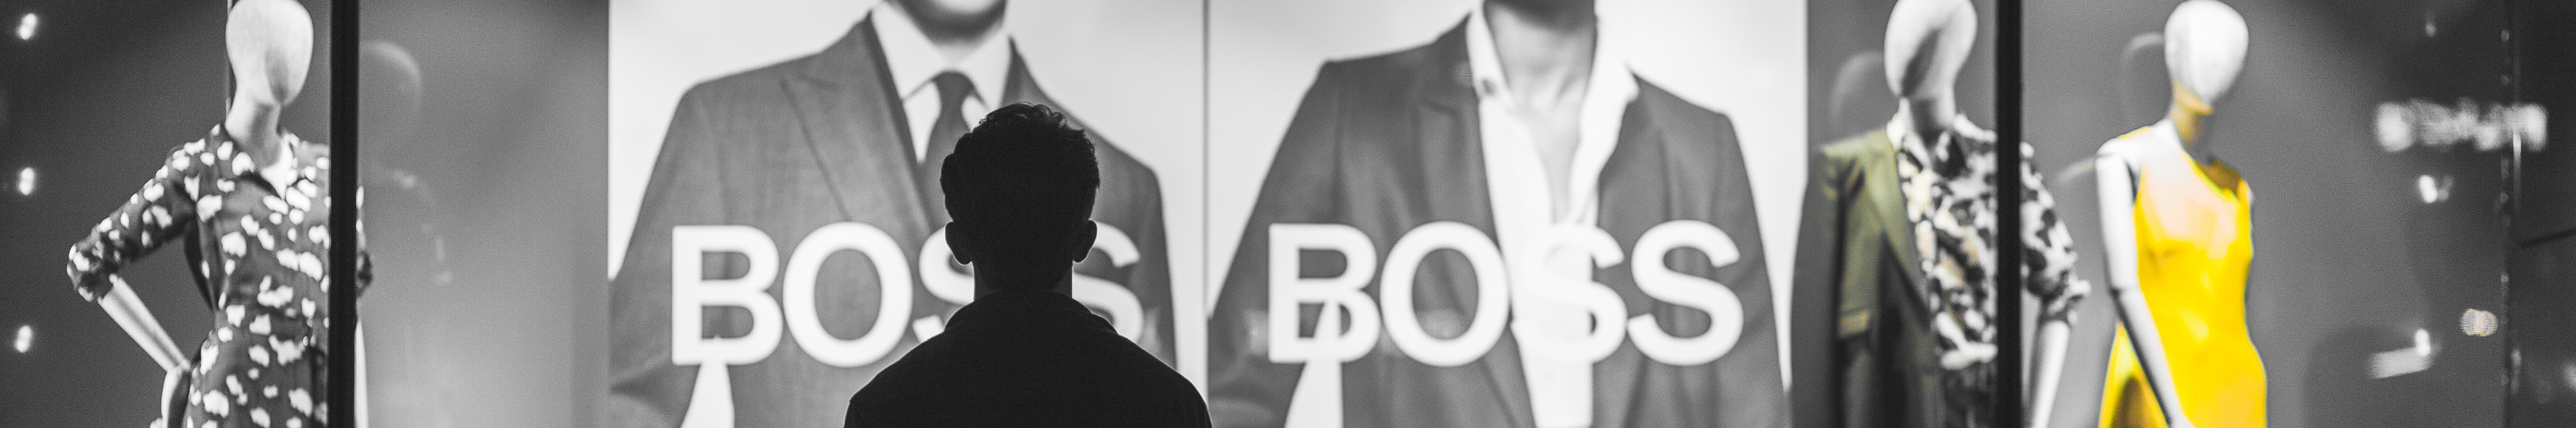 Hugo Boss fashion products enable millions of customers gain confidence and self-expression